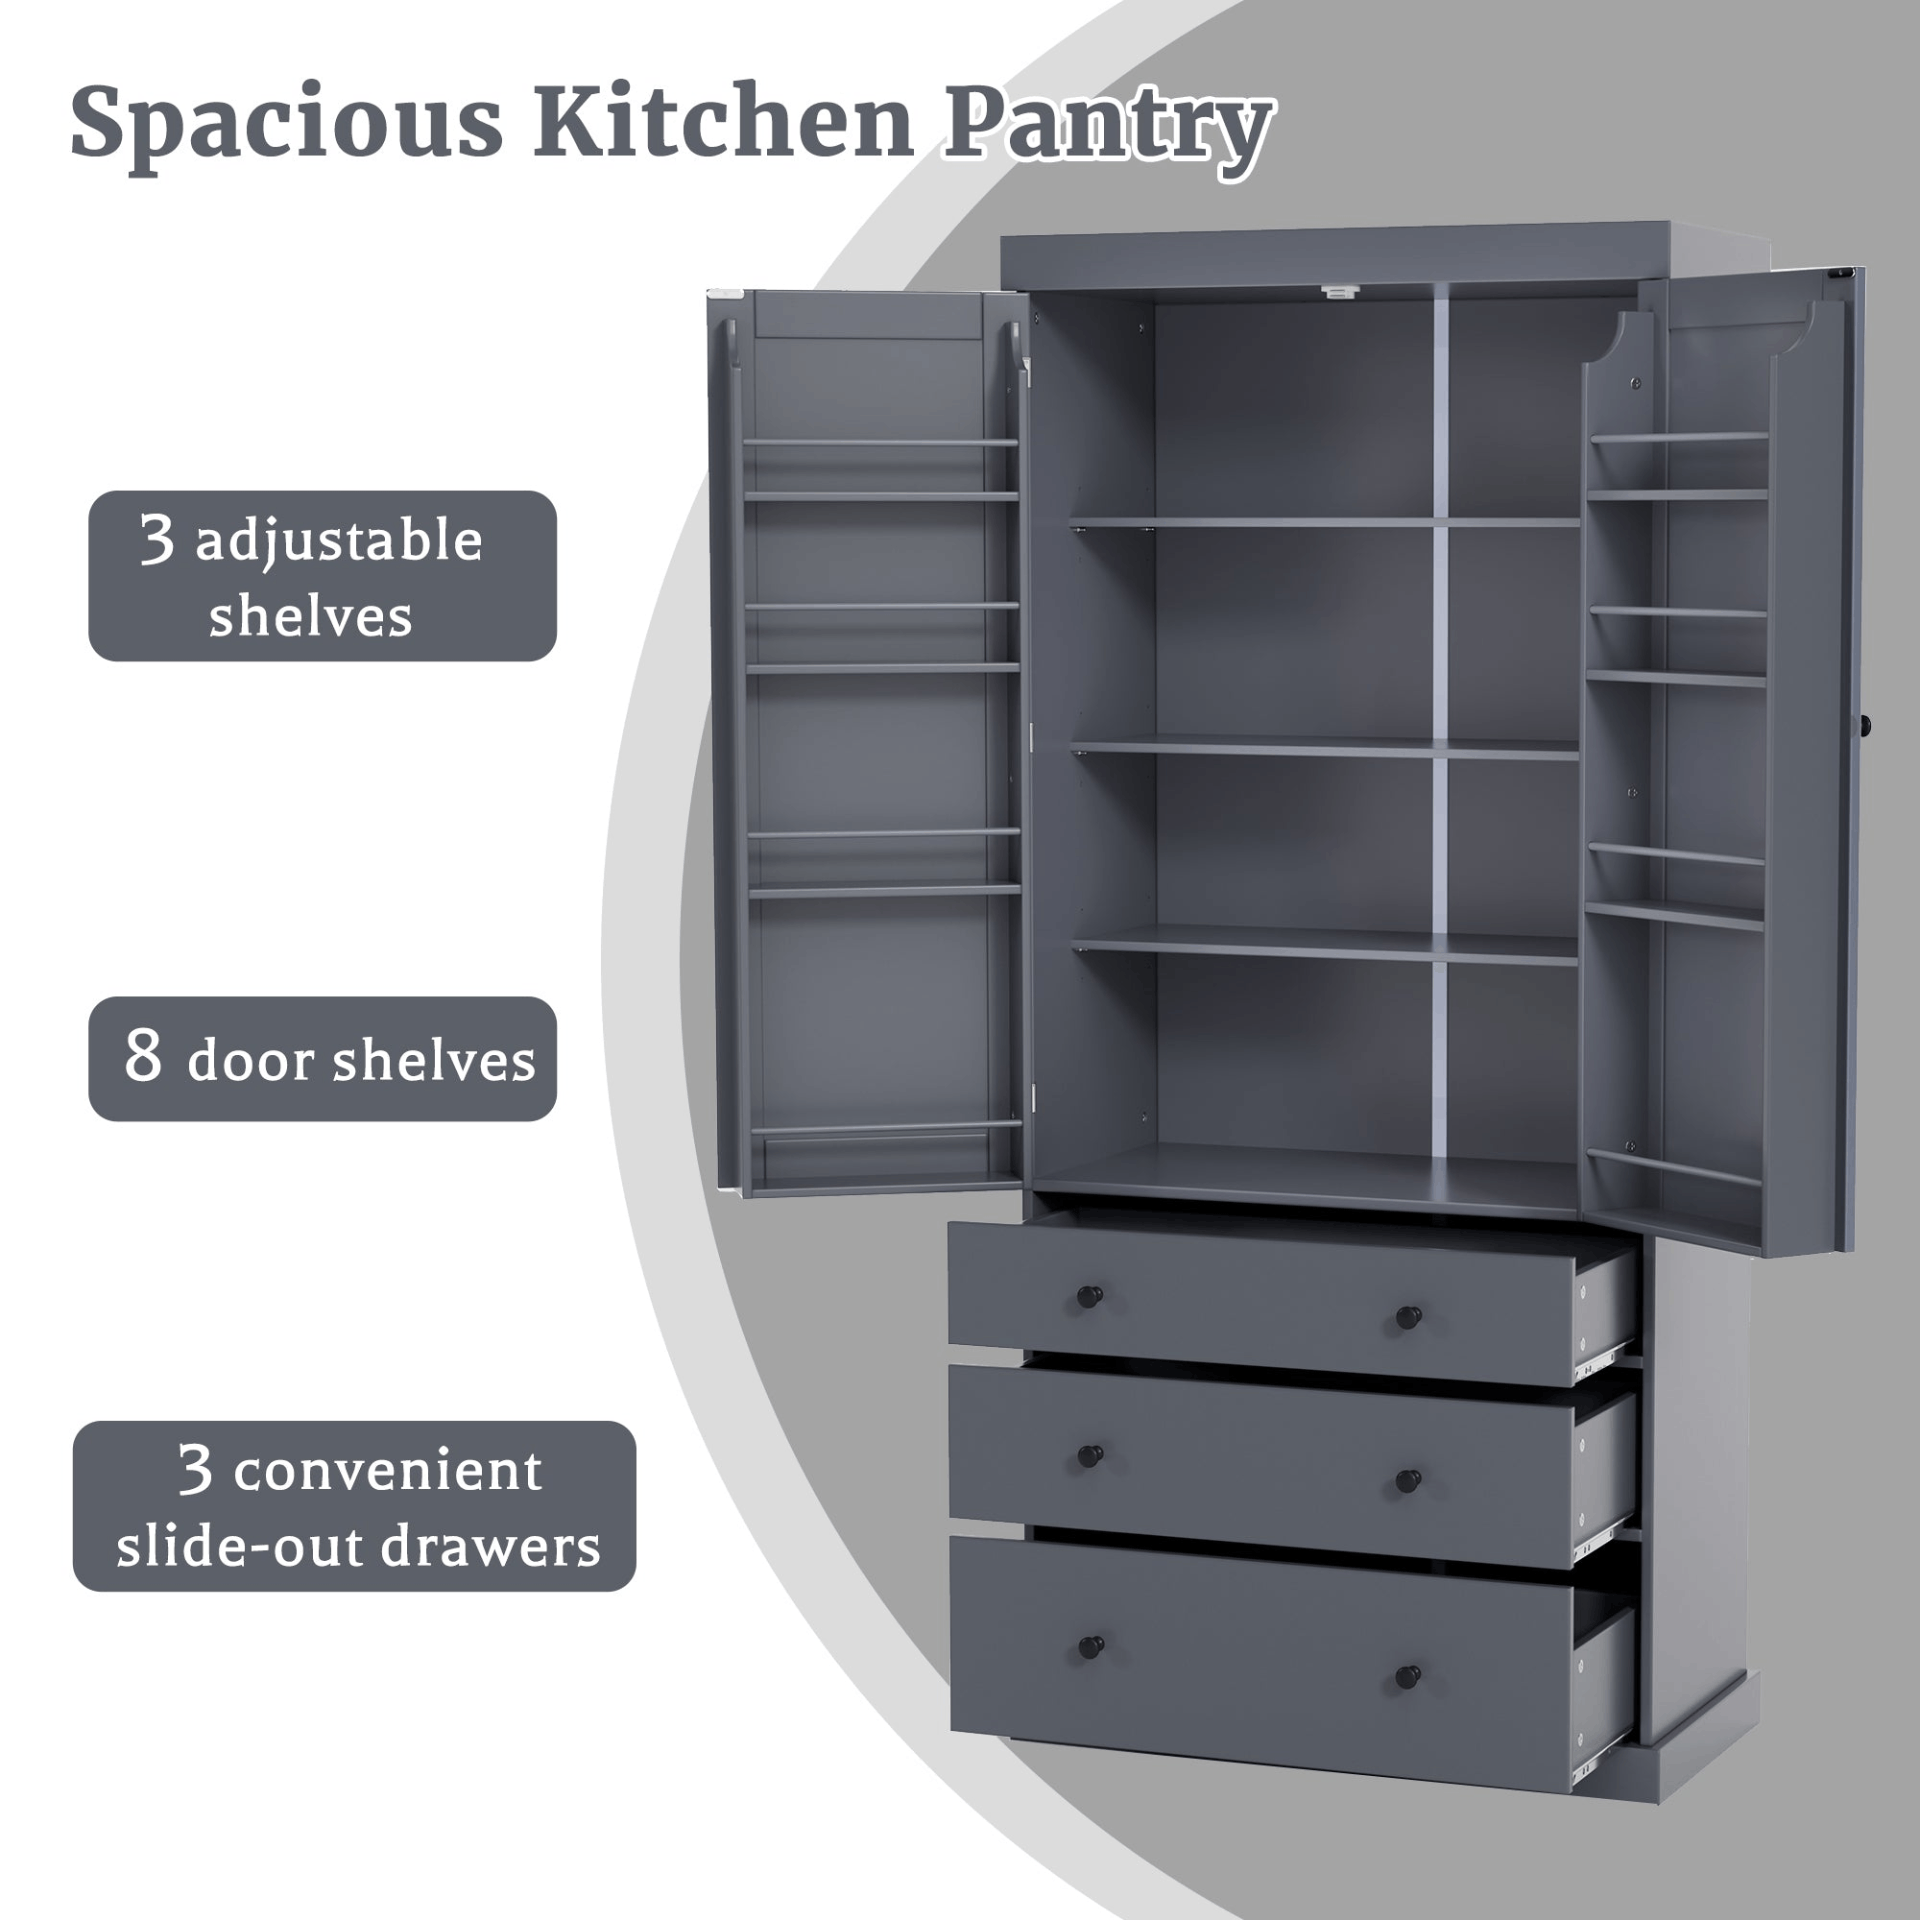 77inch Farmhouse Kitchen Pantry, Freestanding Tall Cupboard Storage Cabinet with 3 Adjustable Shelves, 8 Door Shelves, 3 Drawers for Kitchen, Dining Room, Gray 